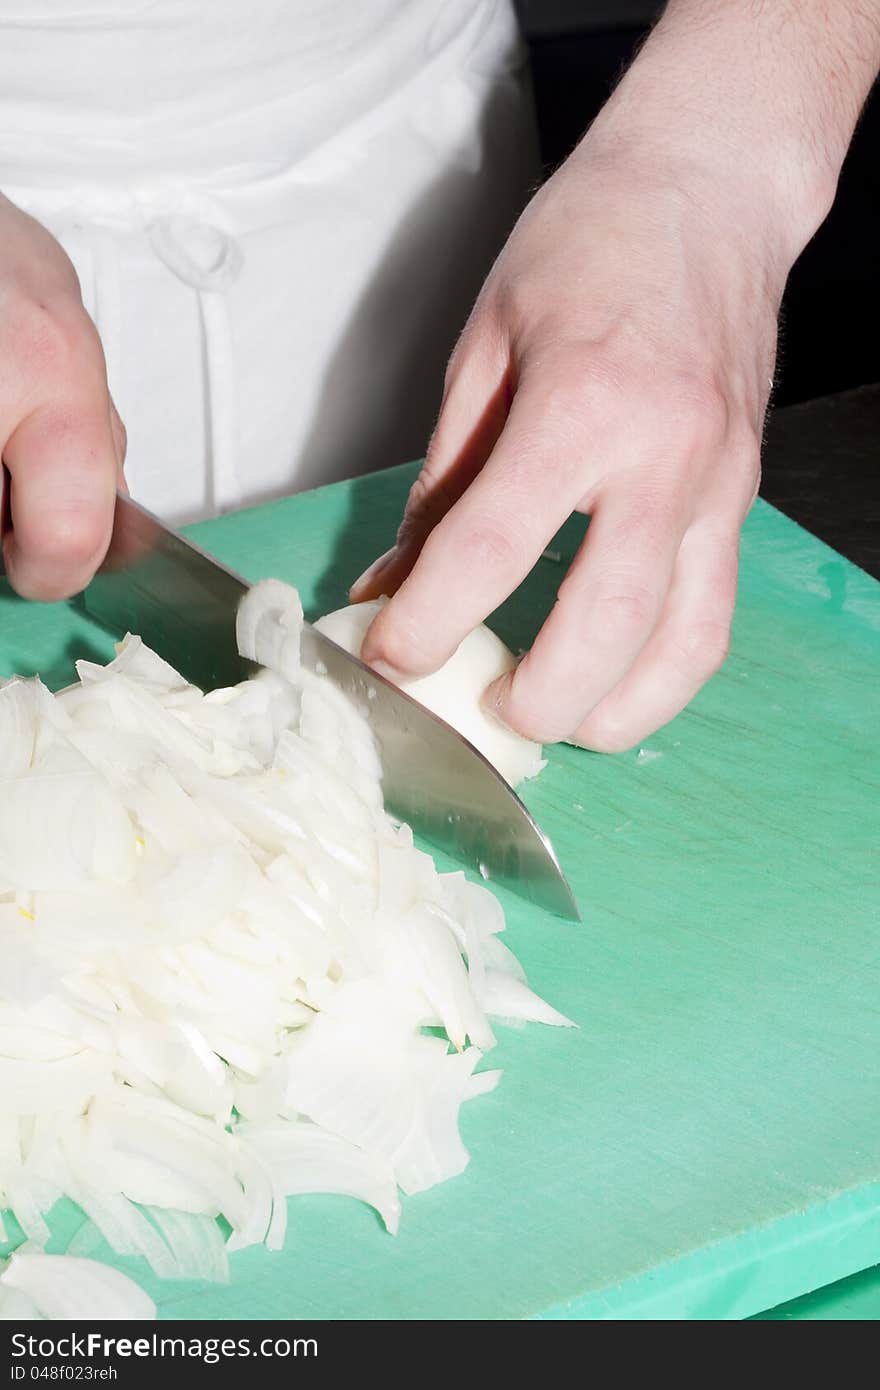 Cook onions cut your cutting board for. Cook onions cut your cutting board for